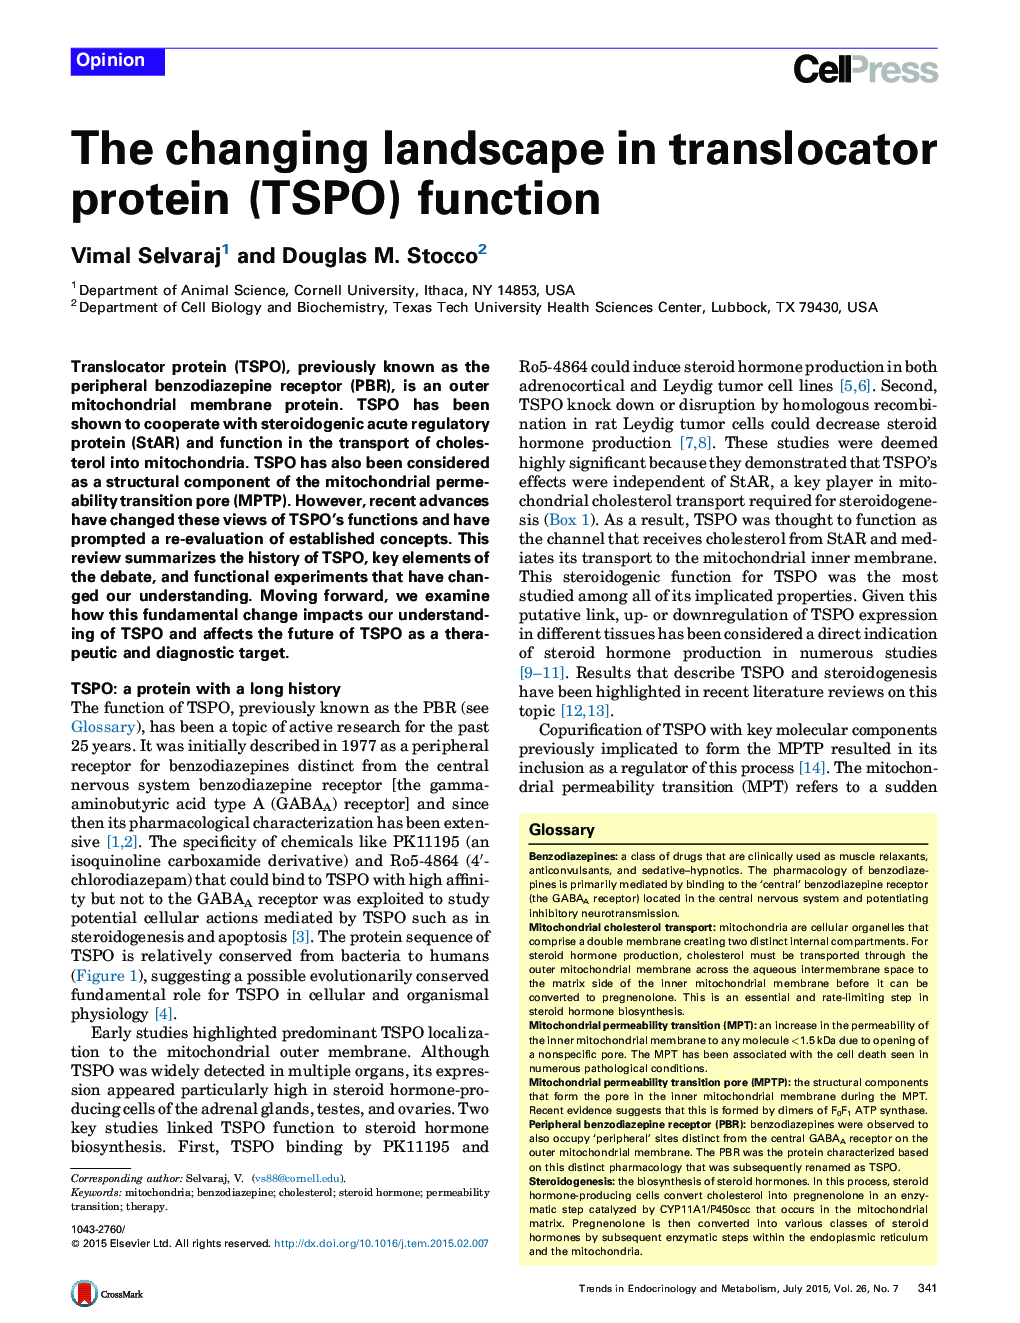 The changing landscape in translocator protein (TSPO) function